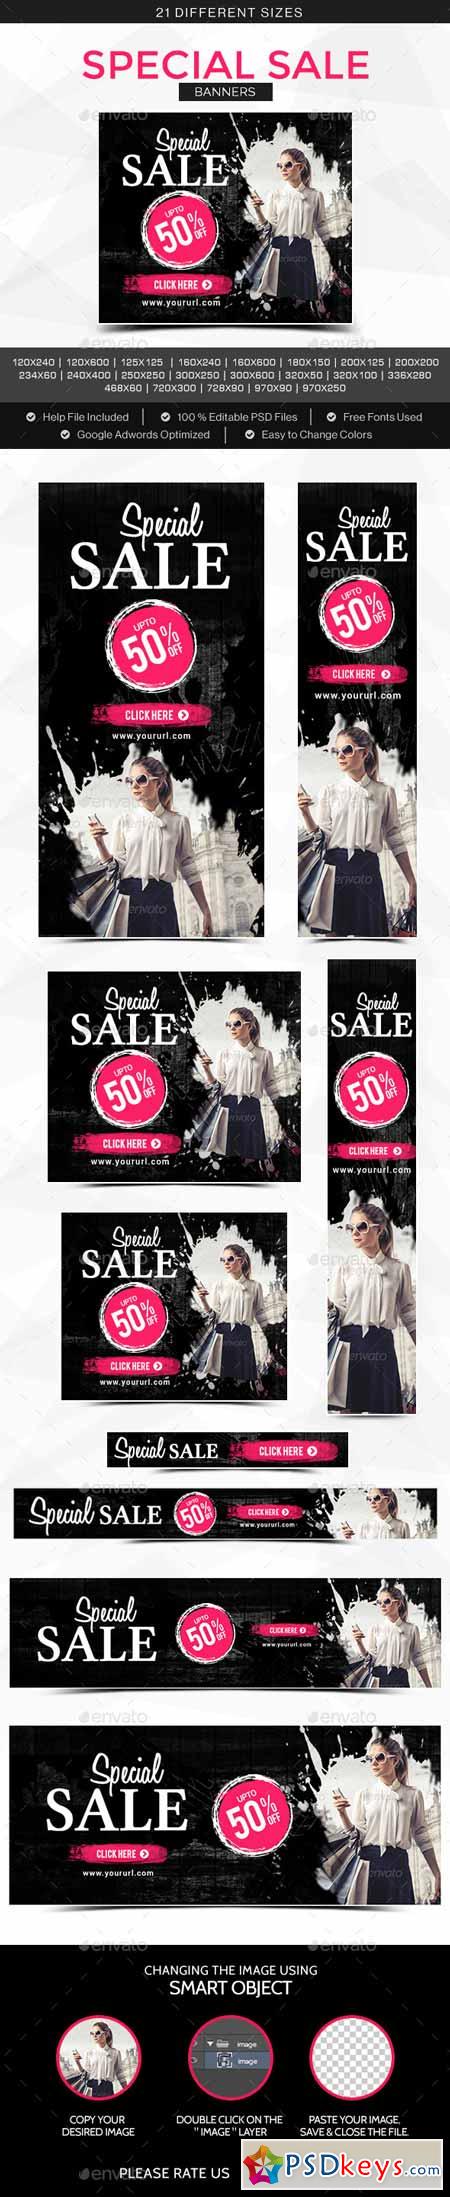 Special Sale Banners 11342218